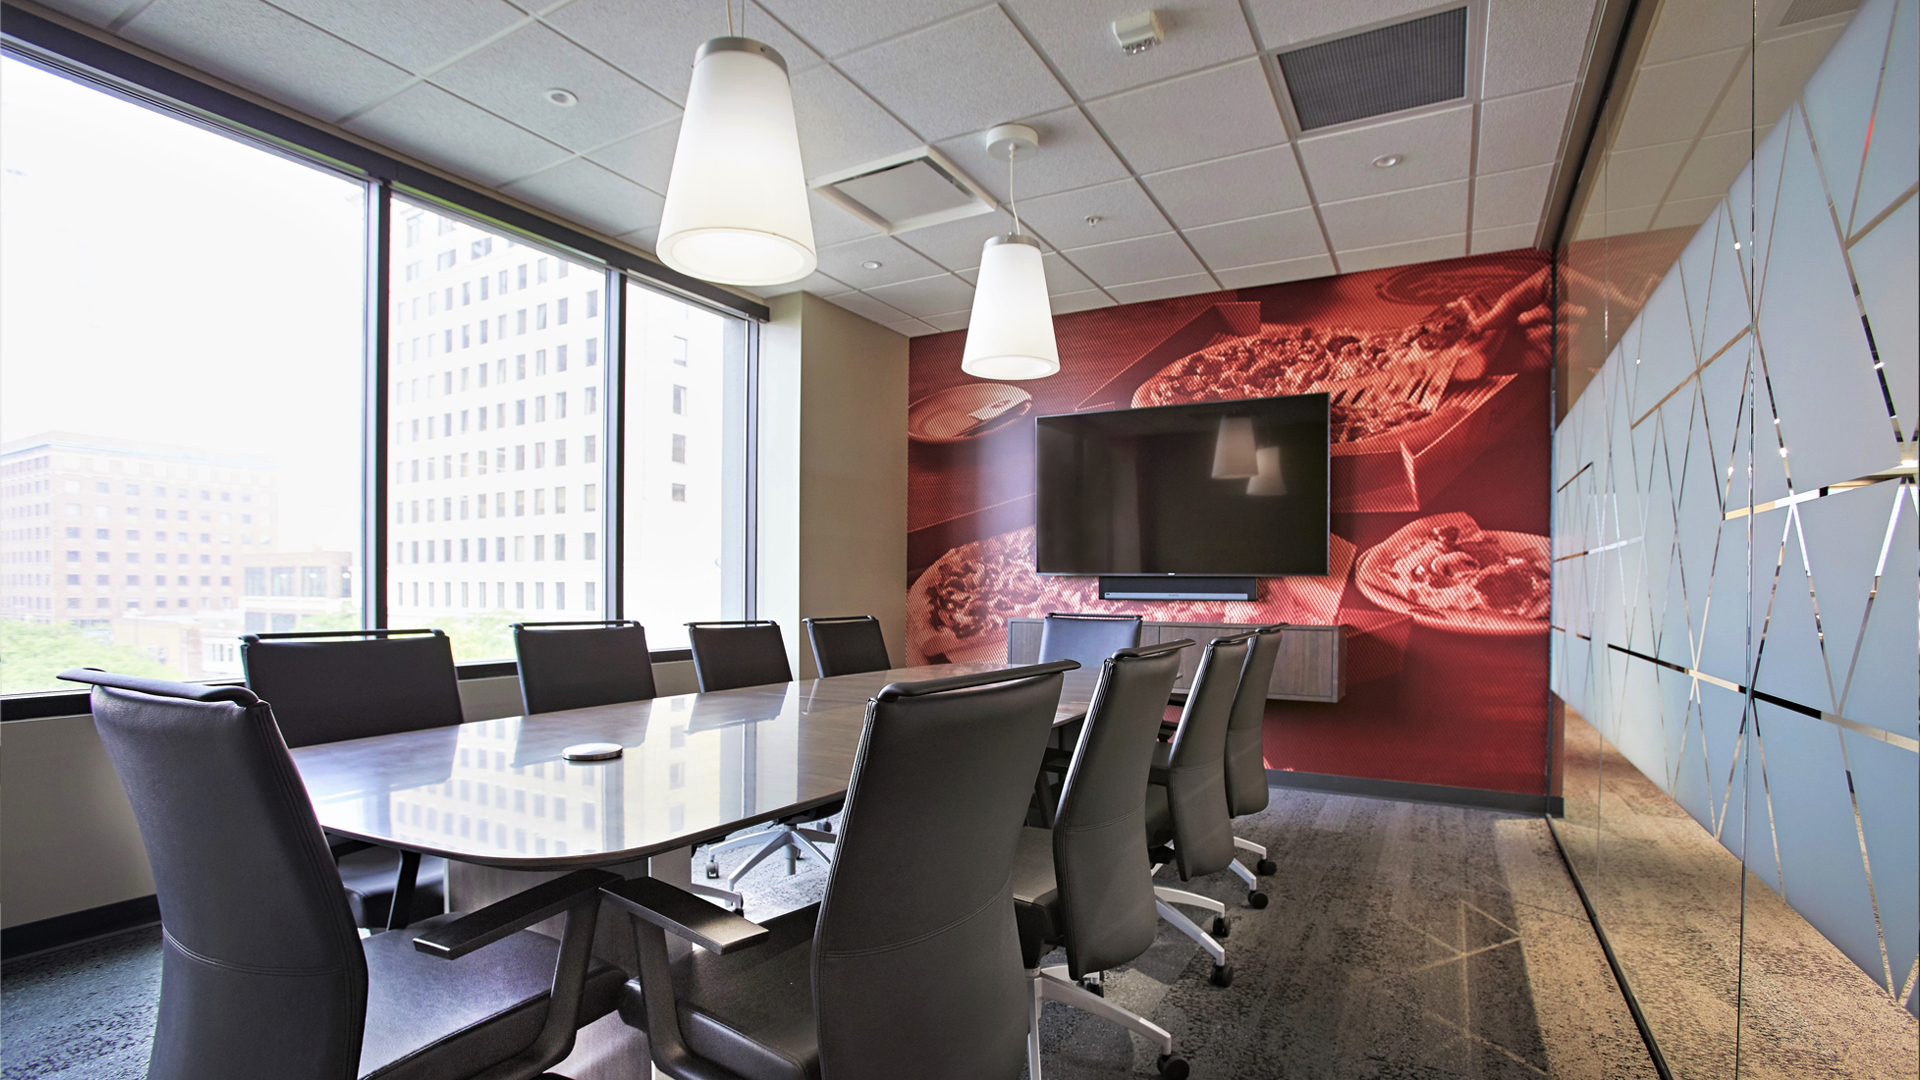 Pizza Hut HQ Conference Room with Environmental Graphic